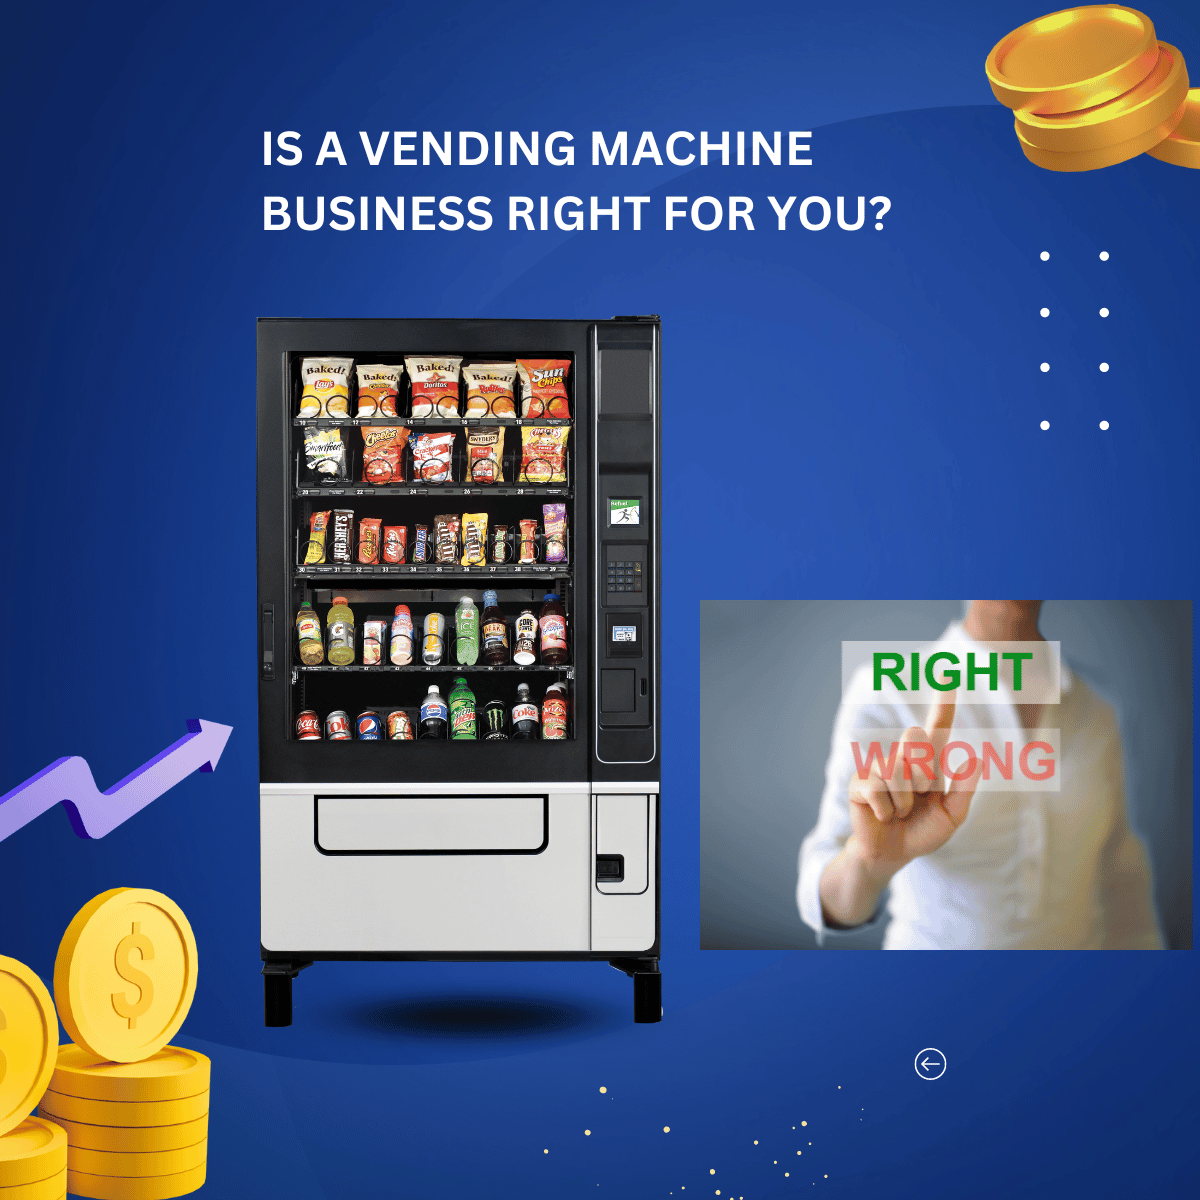 IS A VENDING MACHINE BUSINESS RIGHT FOR YOU?